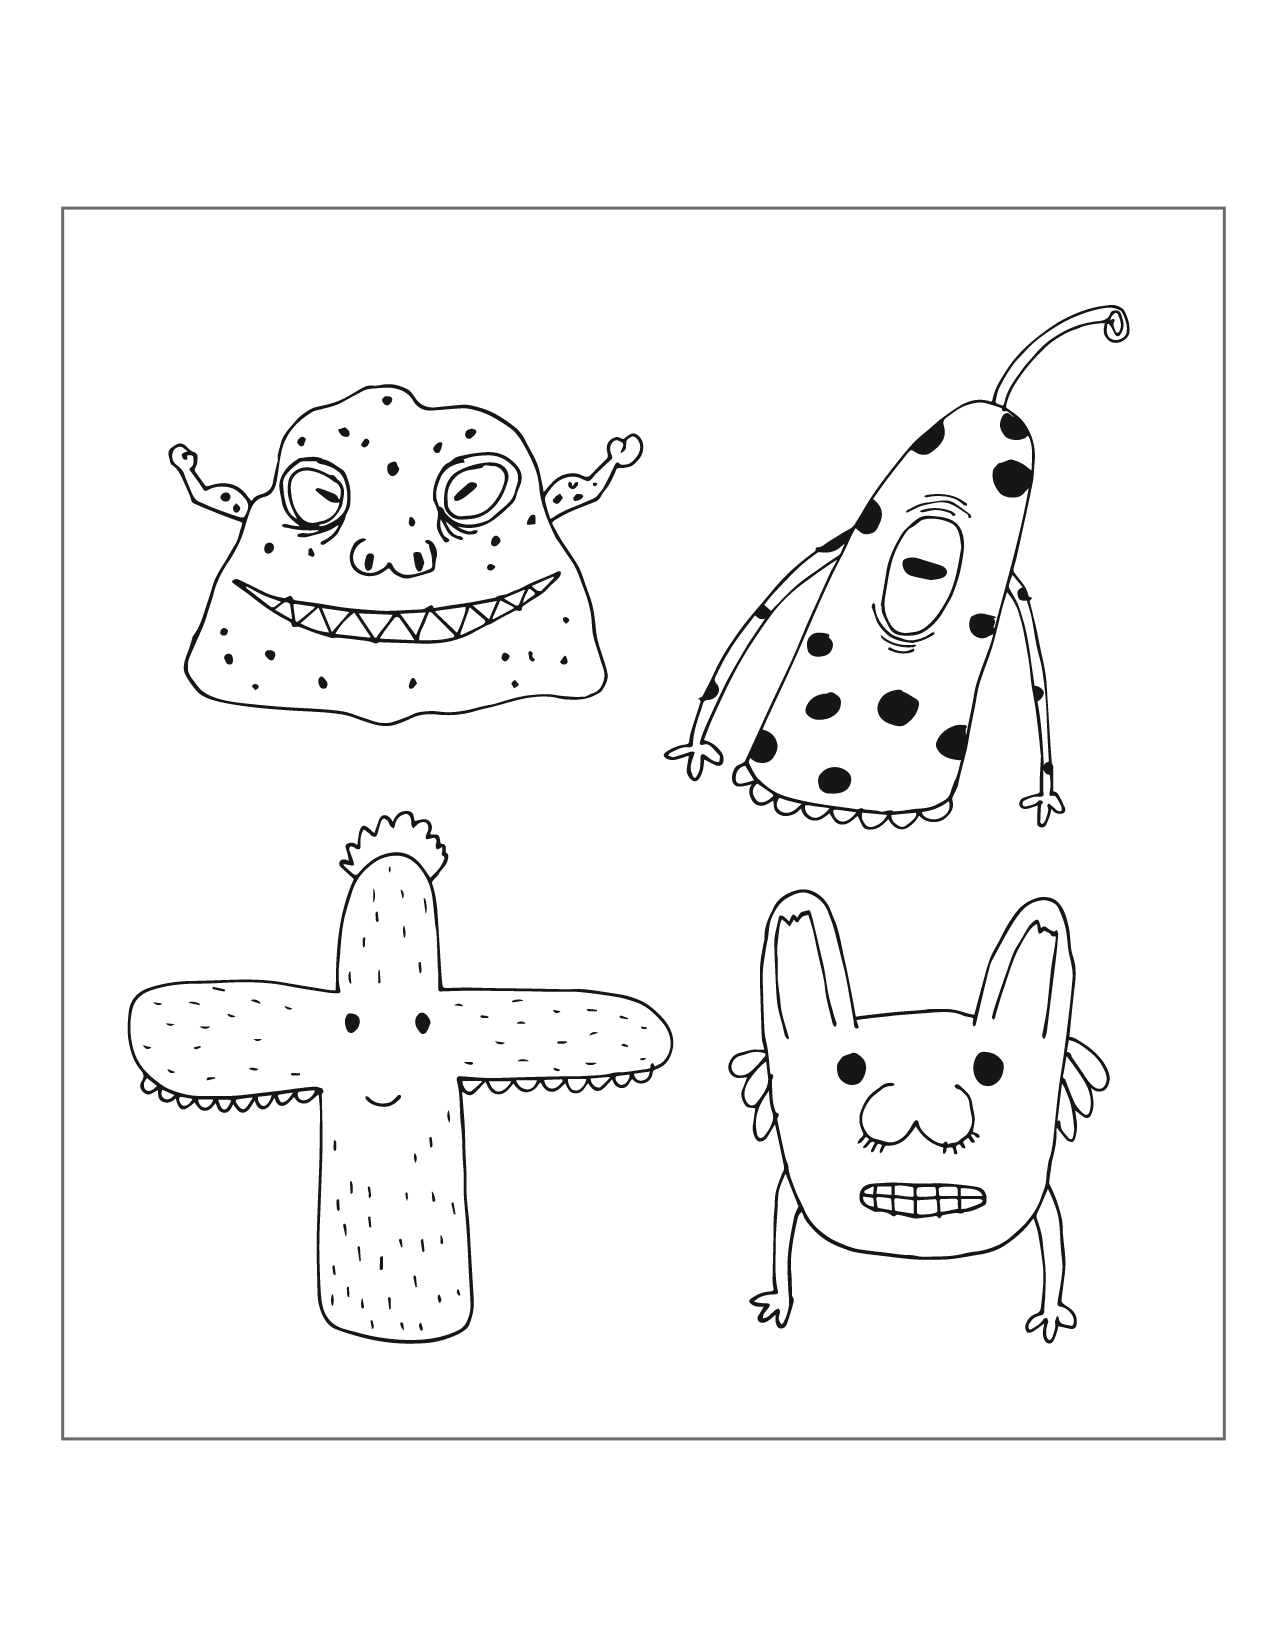 Cute Monster Characters Coloring Page 03